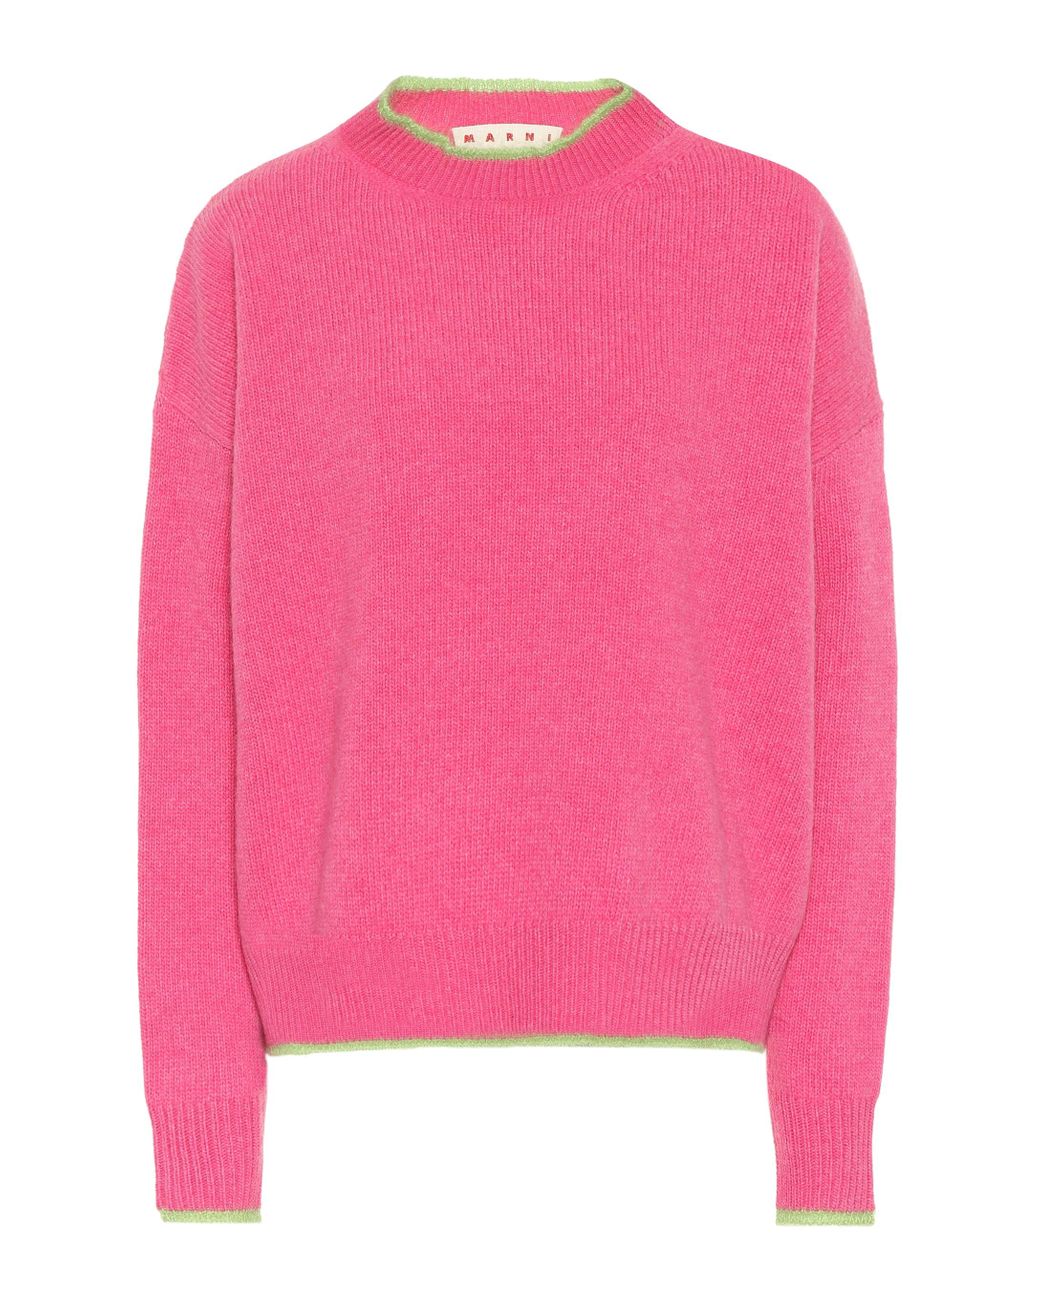 Marni Wool And Mohair-blend Sweater in Pink - Lyst